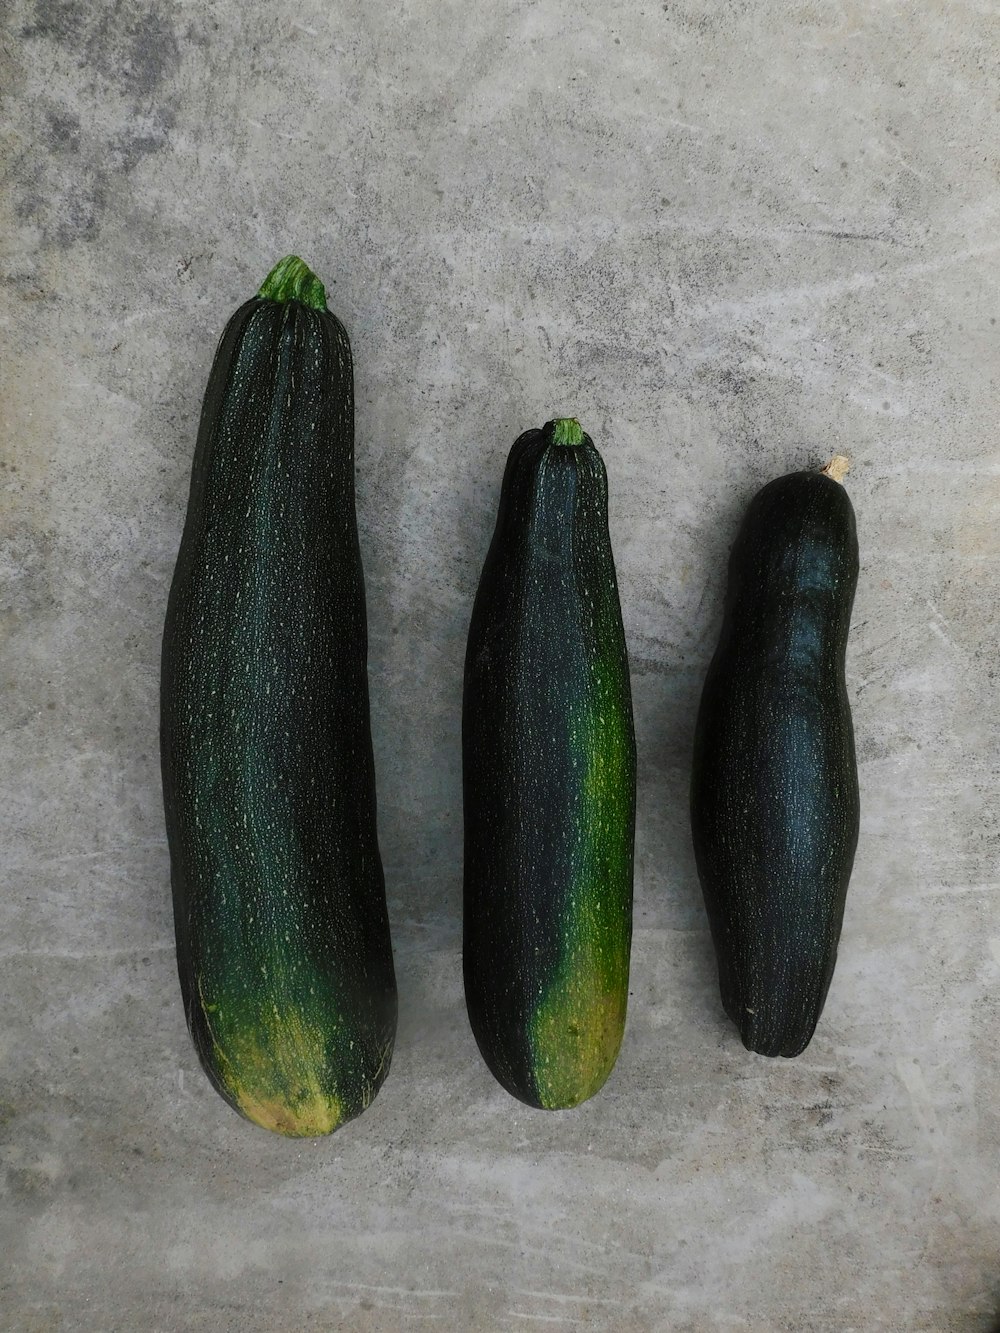 a group of zucchini vegetables